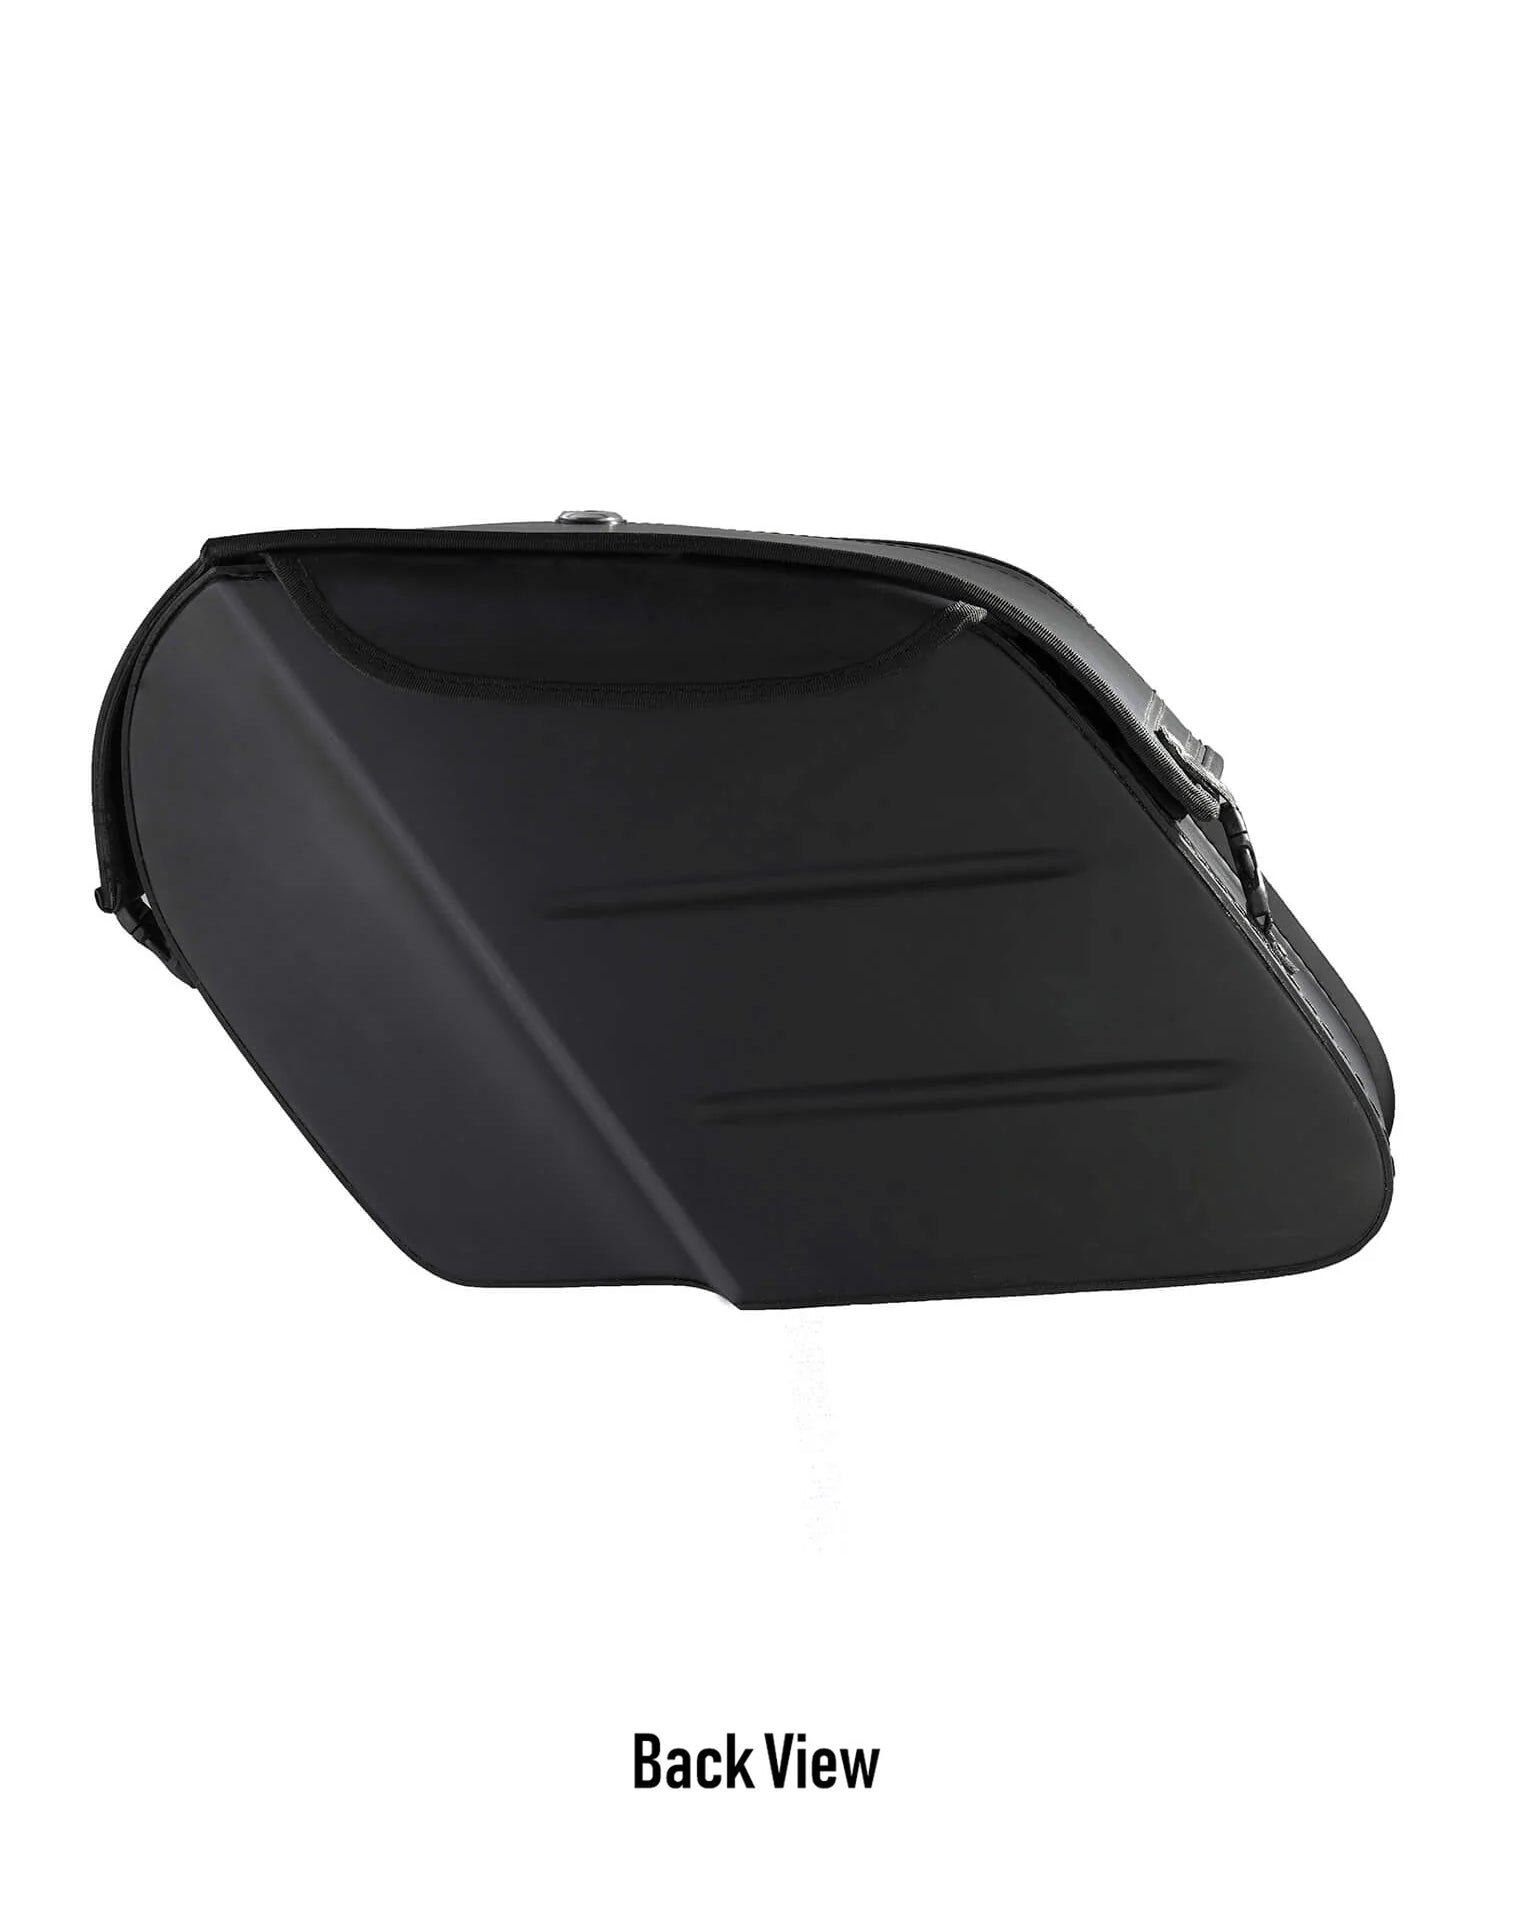 Viking Raven Extra Large Triumph Thunderbird Shock Cut Out Leather Motorcycle Saddlebags are Durable